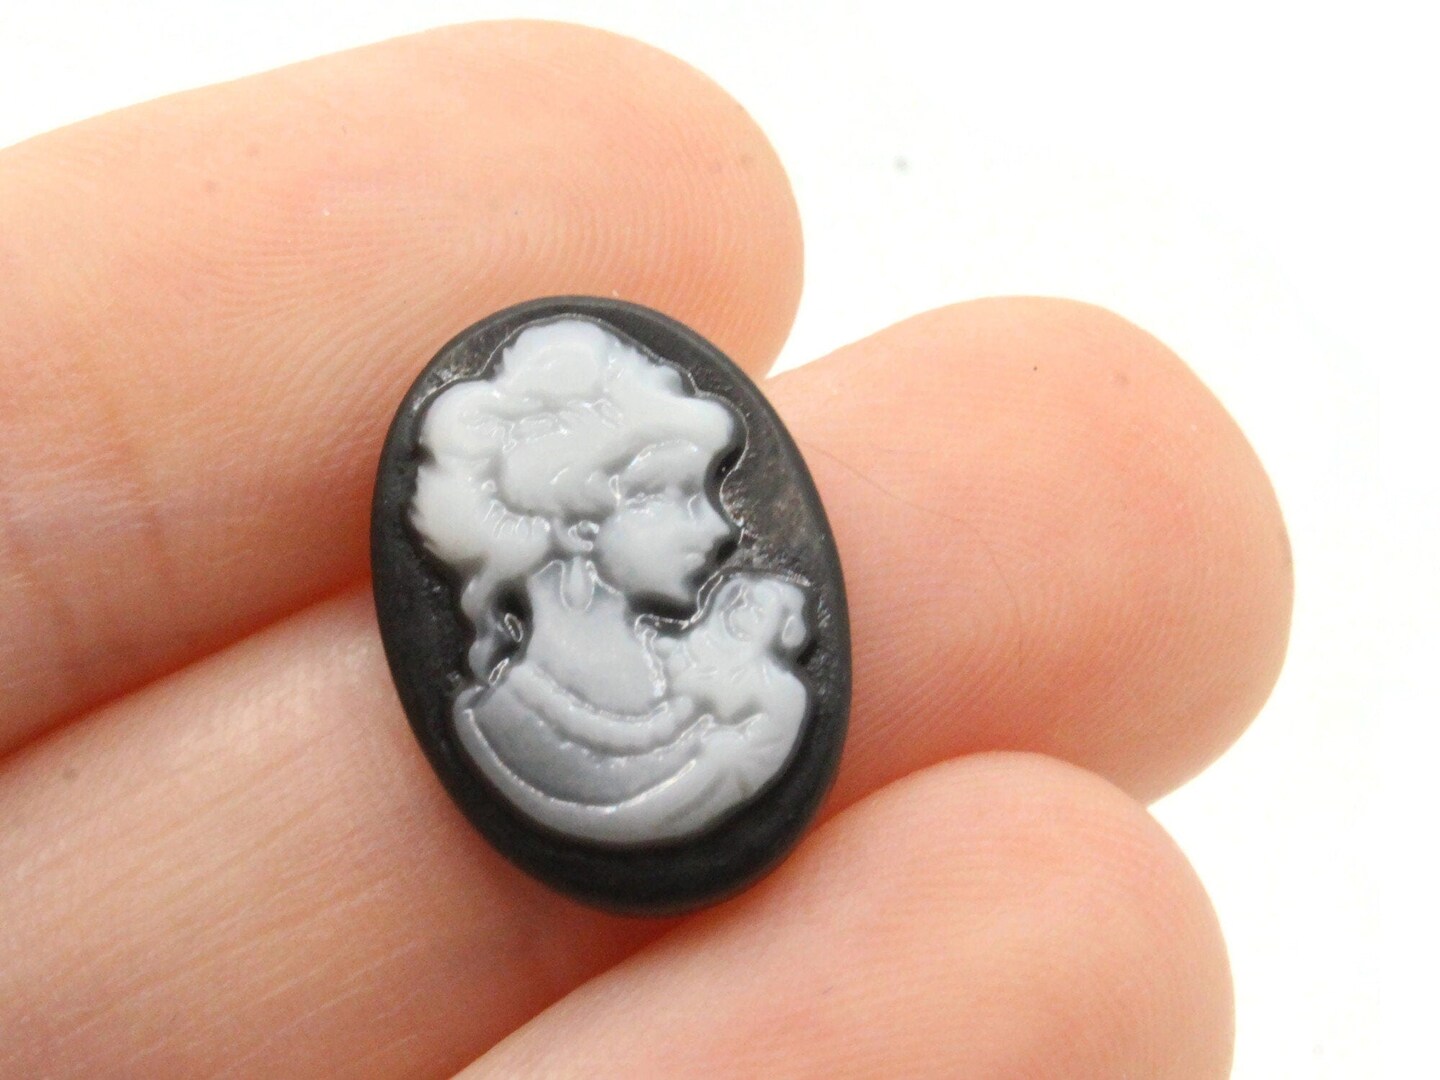 10 18x13mm Black Cameos Flatback Cameo Victorian Woman&#x27;s Face Resin Cabochons